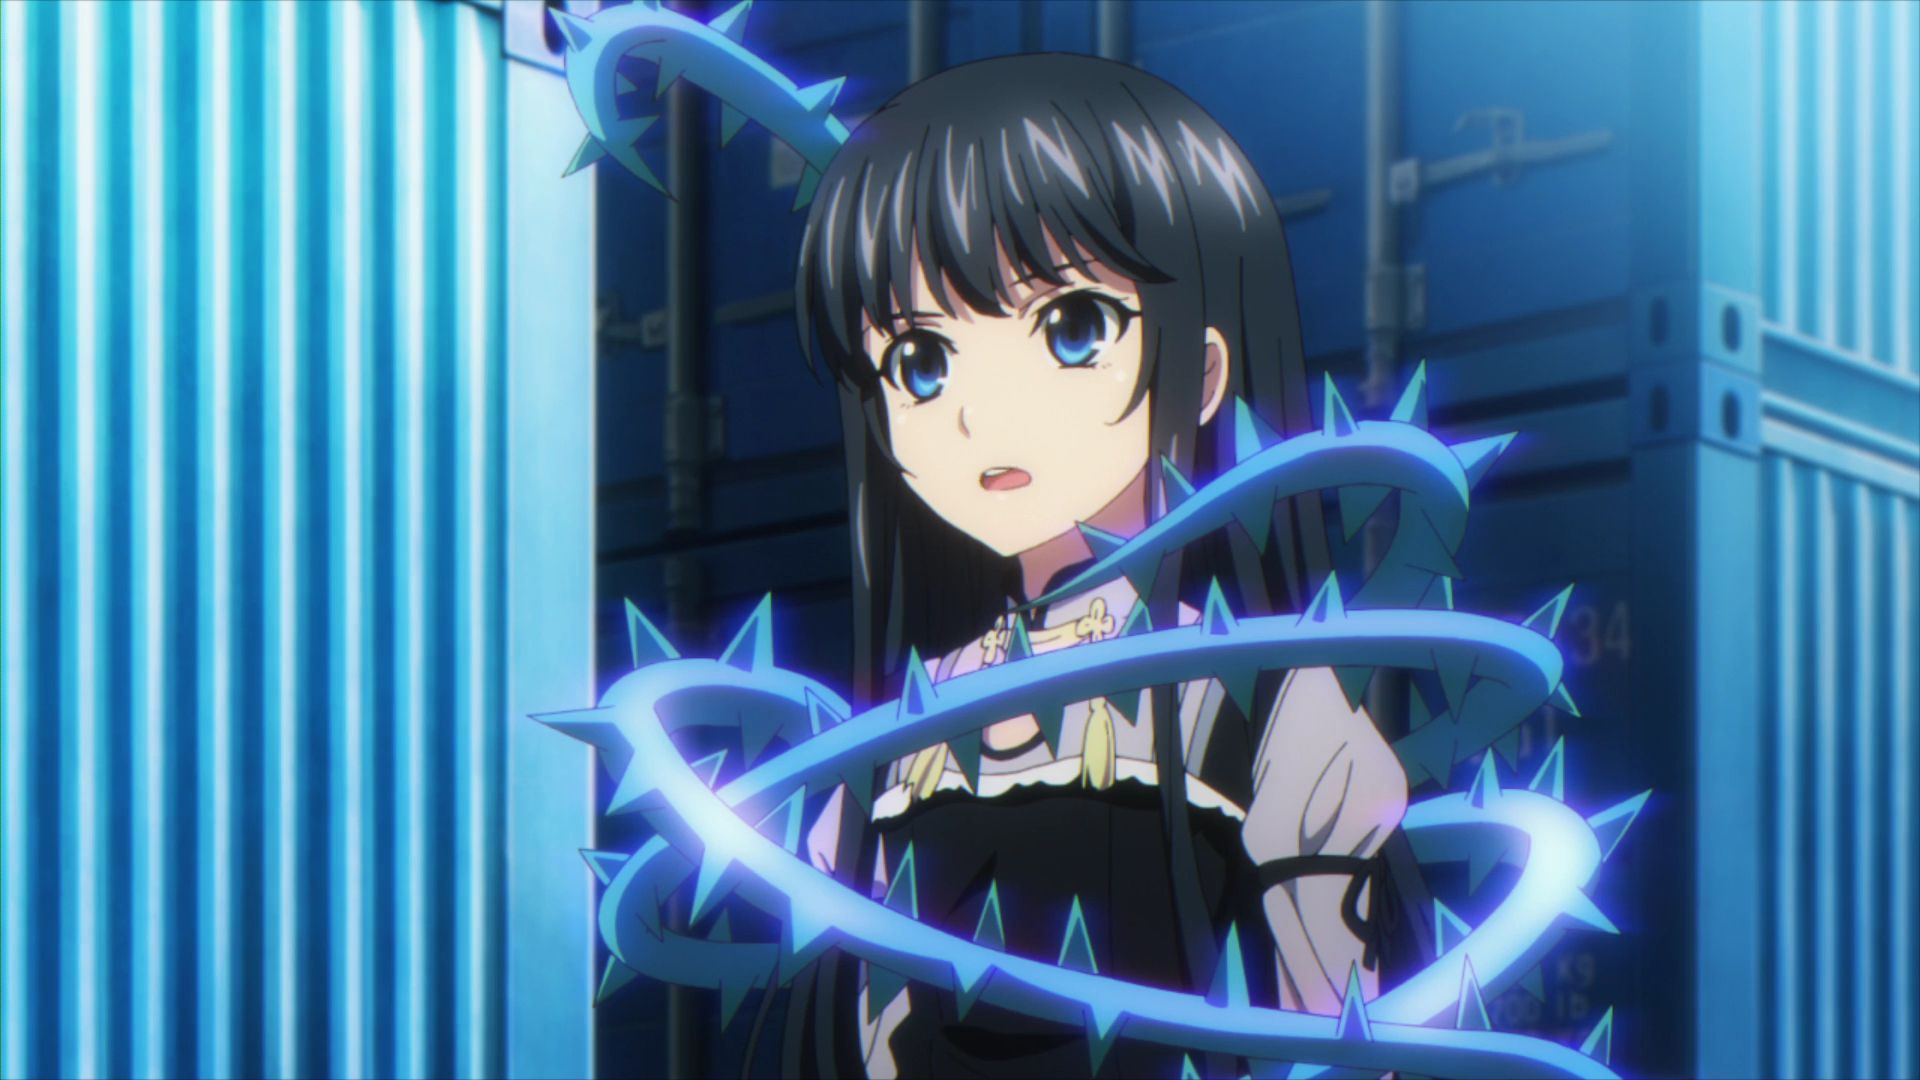 All of Strike the Blood IV’s Girls Strip for the Coveted Male Hero.